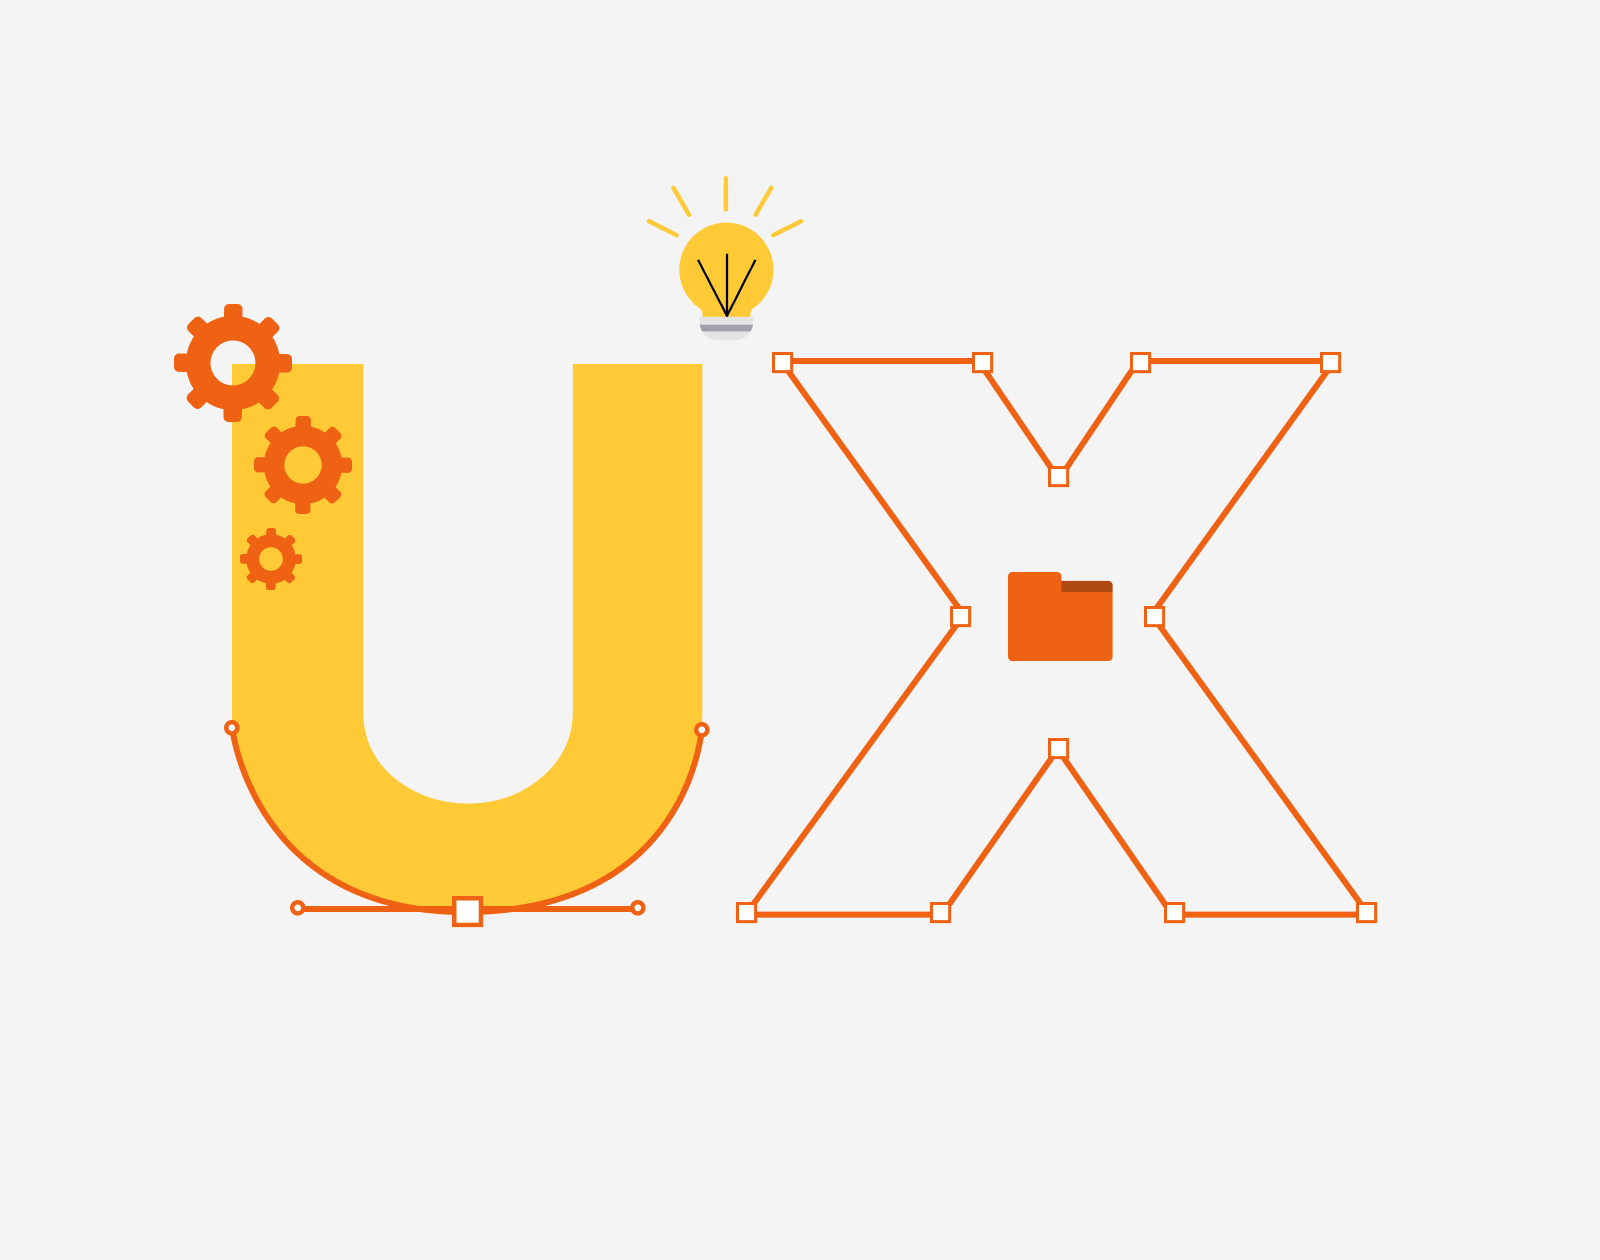 “UX” stands for “user experience”